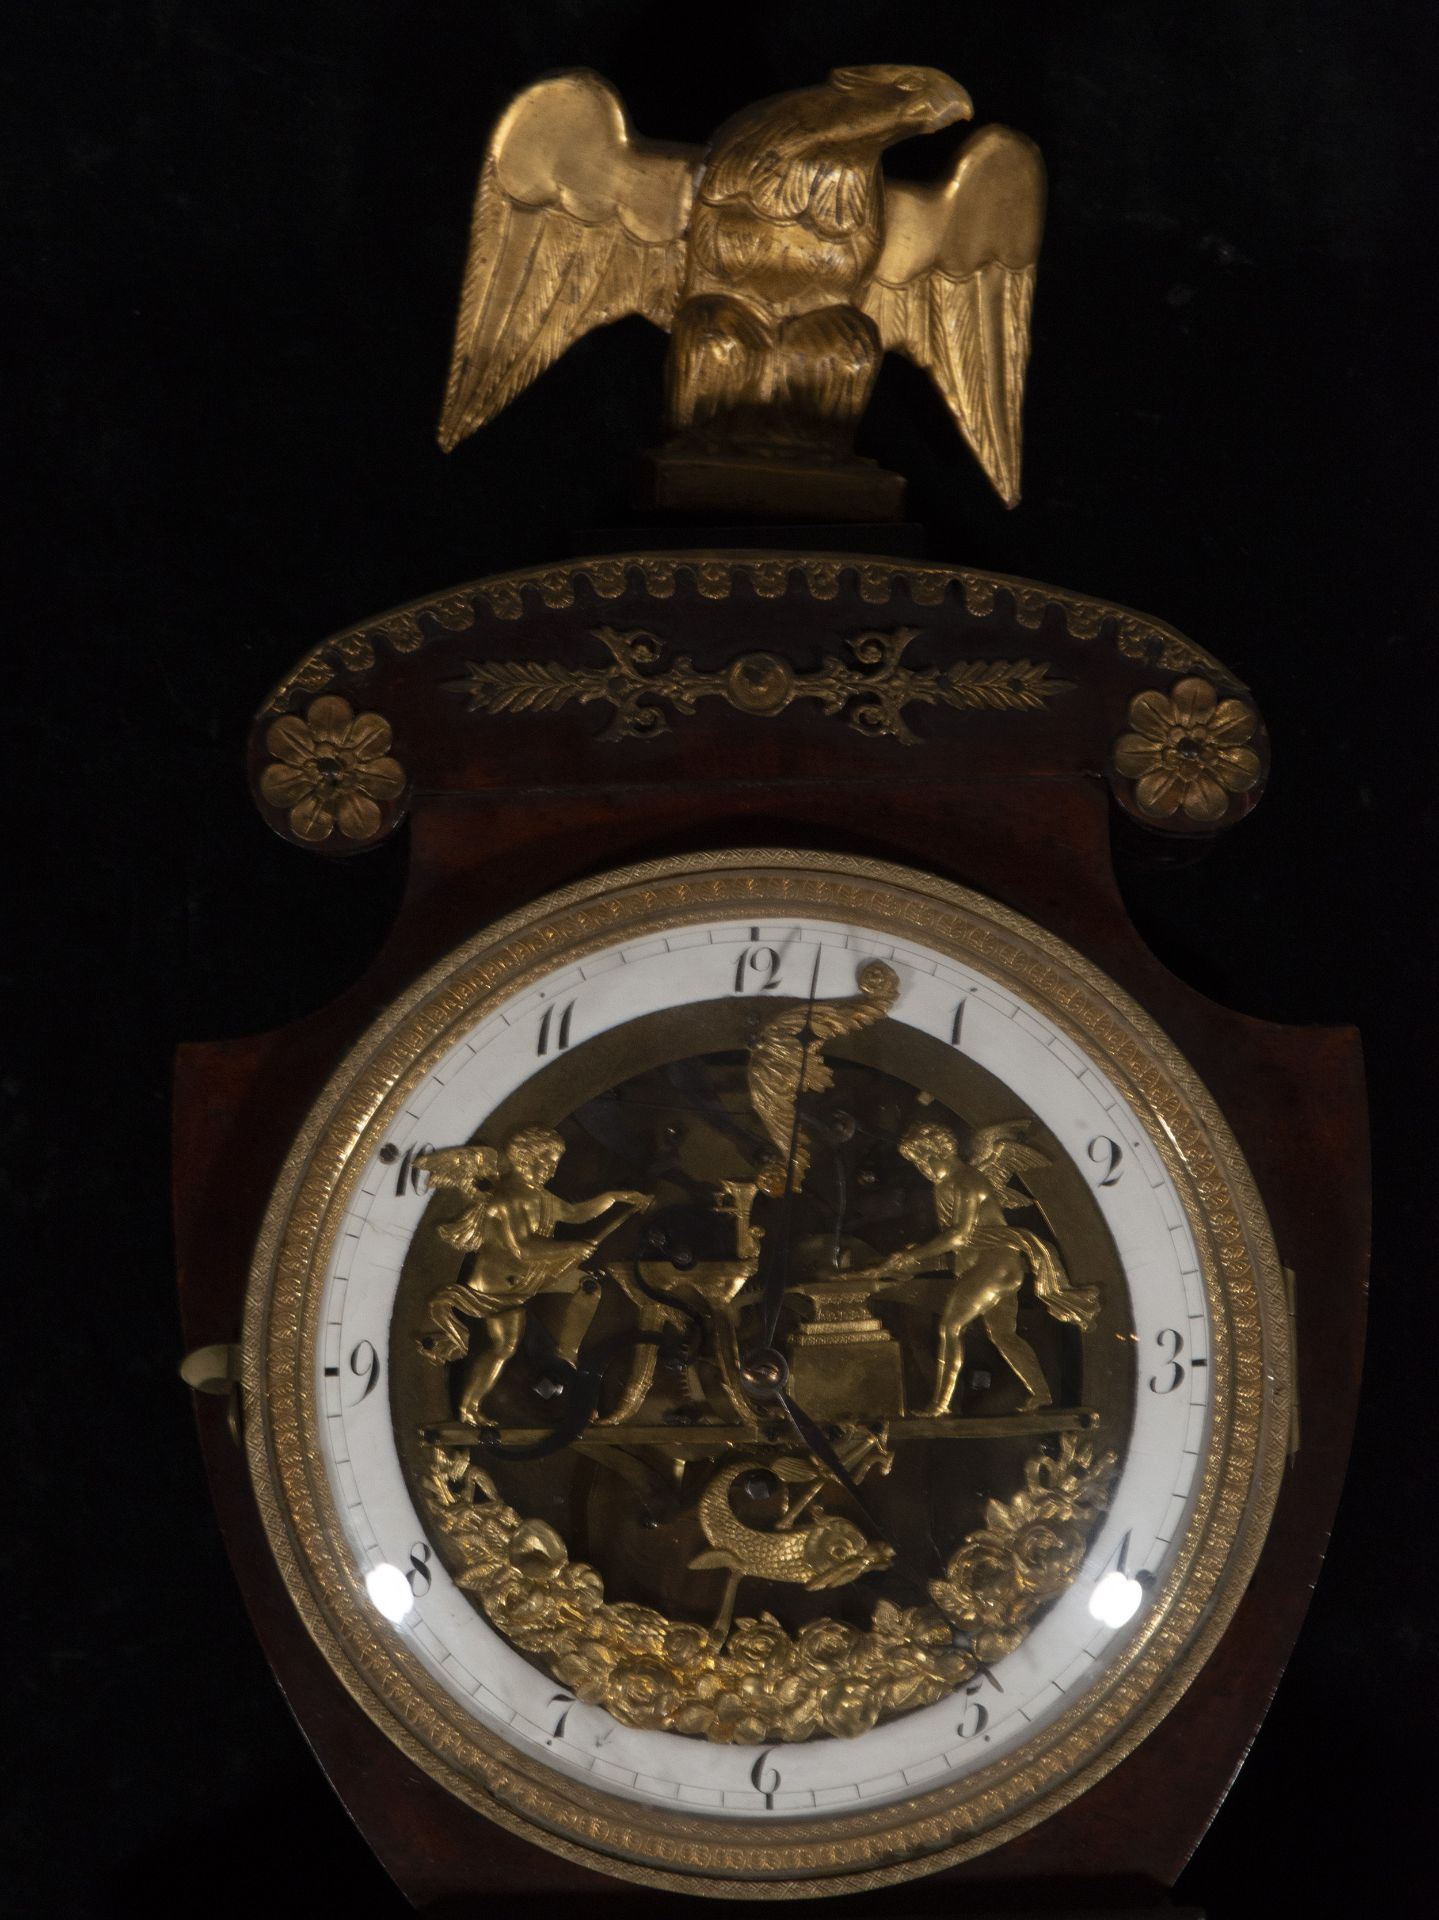 Large and Exquisite Bilderrahmen Table Clock with Automata from the late 19th century, Austria - Image 3 of 15